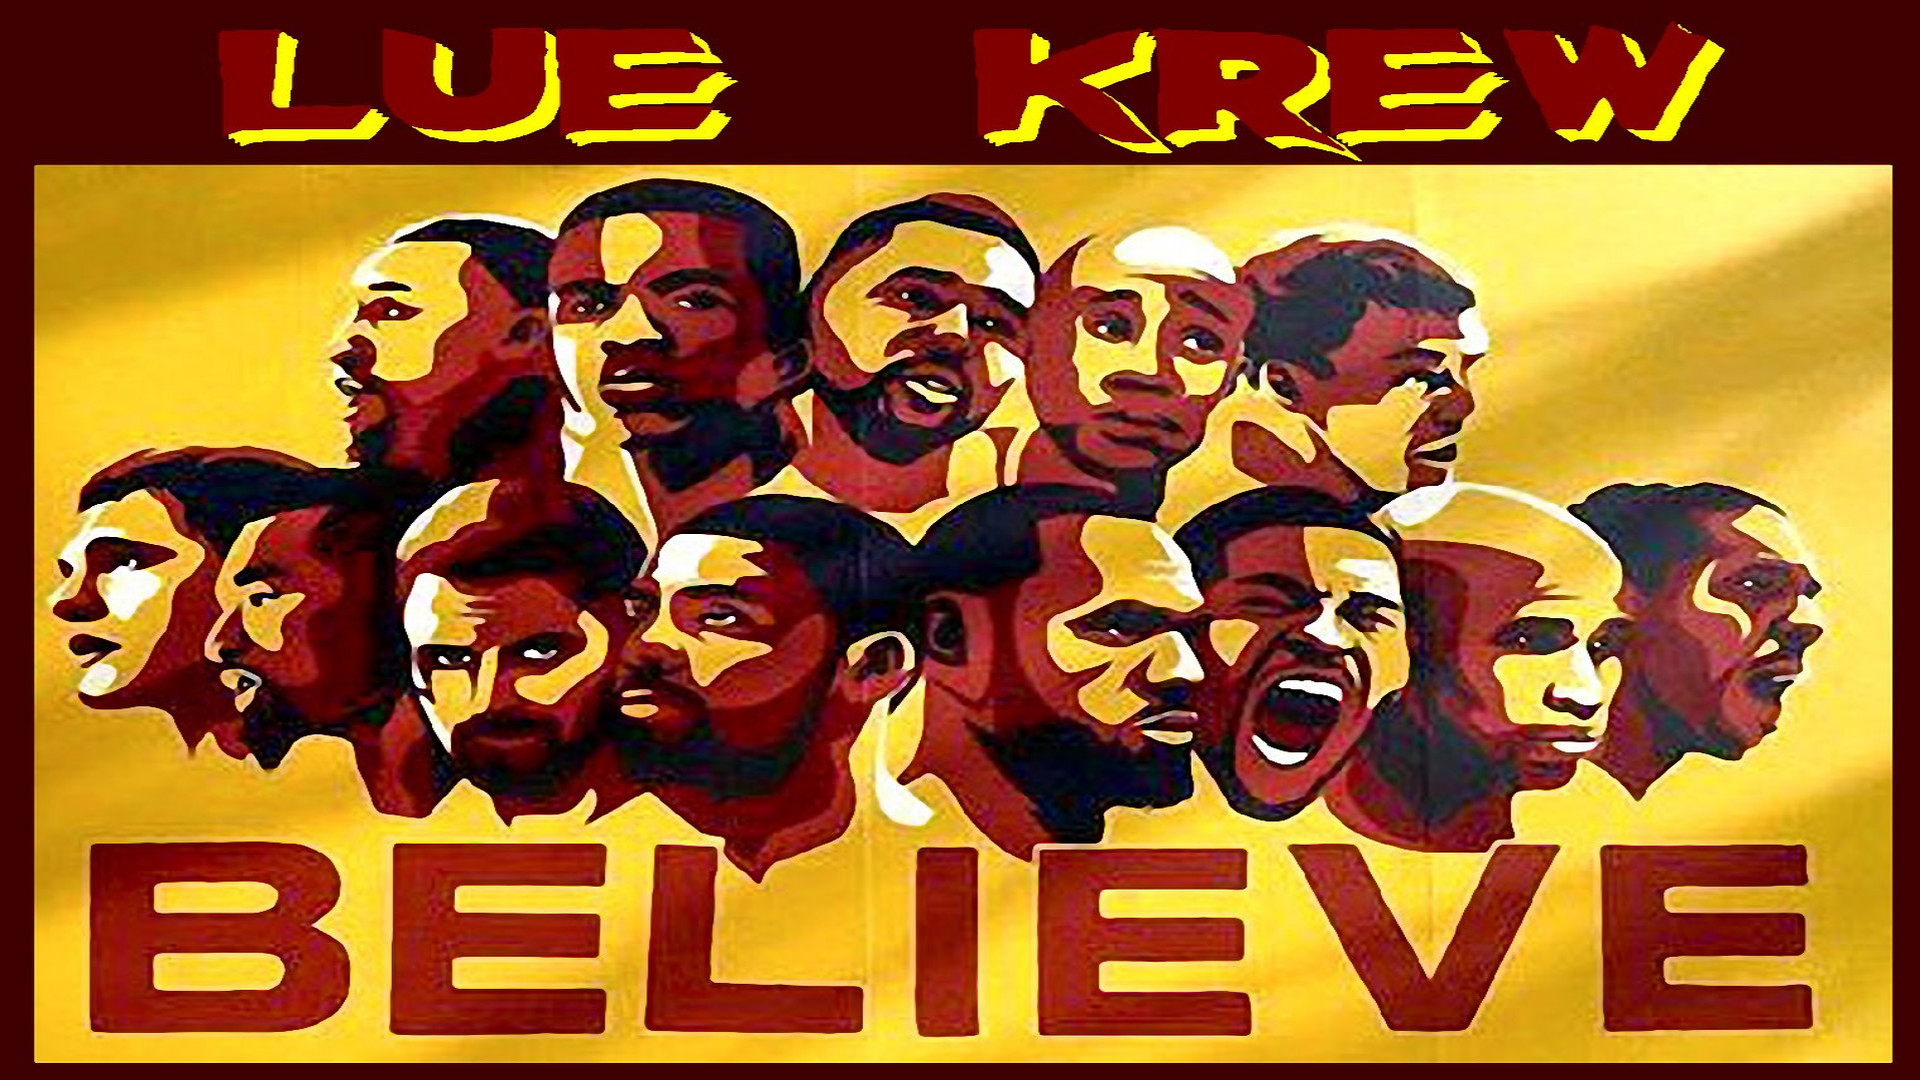 1920x1080 Cleveland Cavaliers images LUE KREW HD wallpaper and background photos